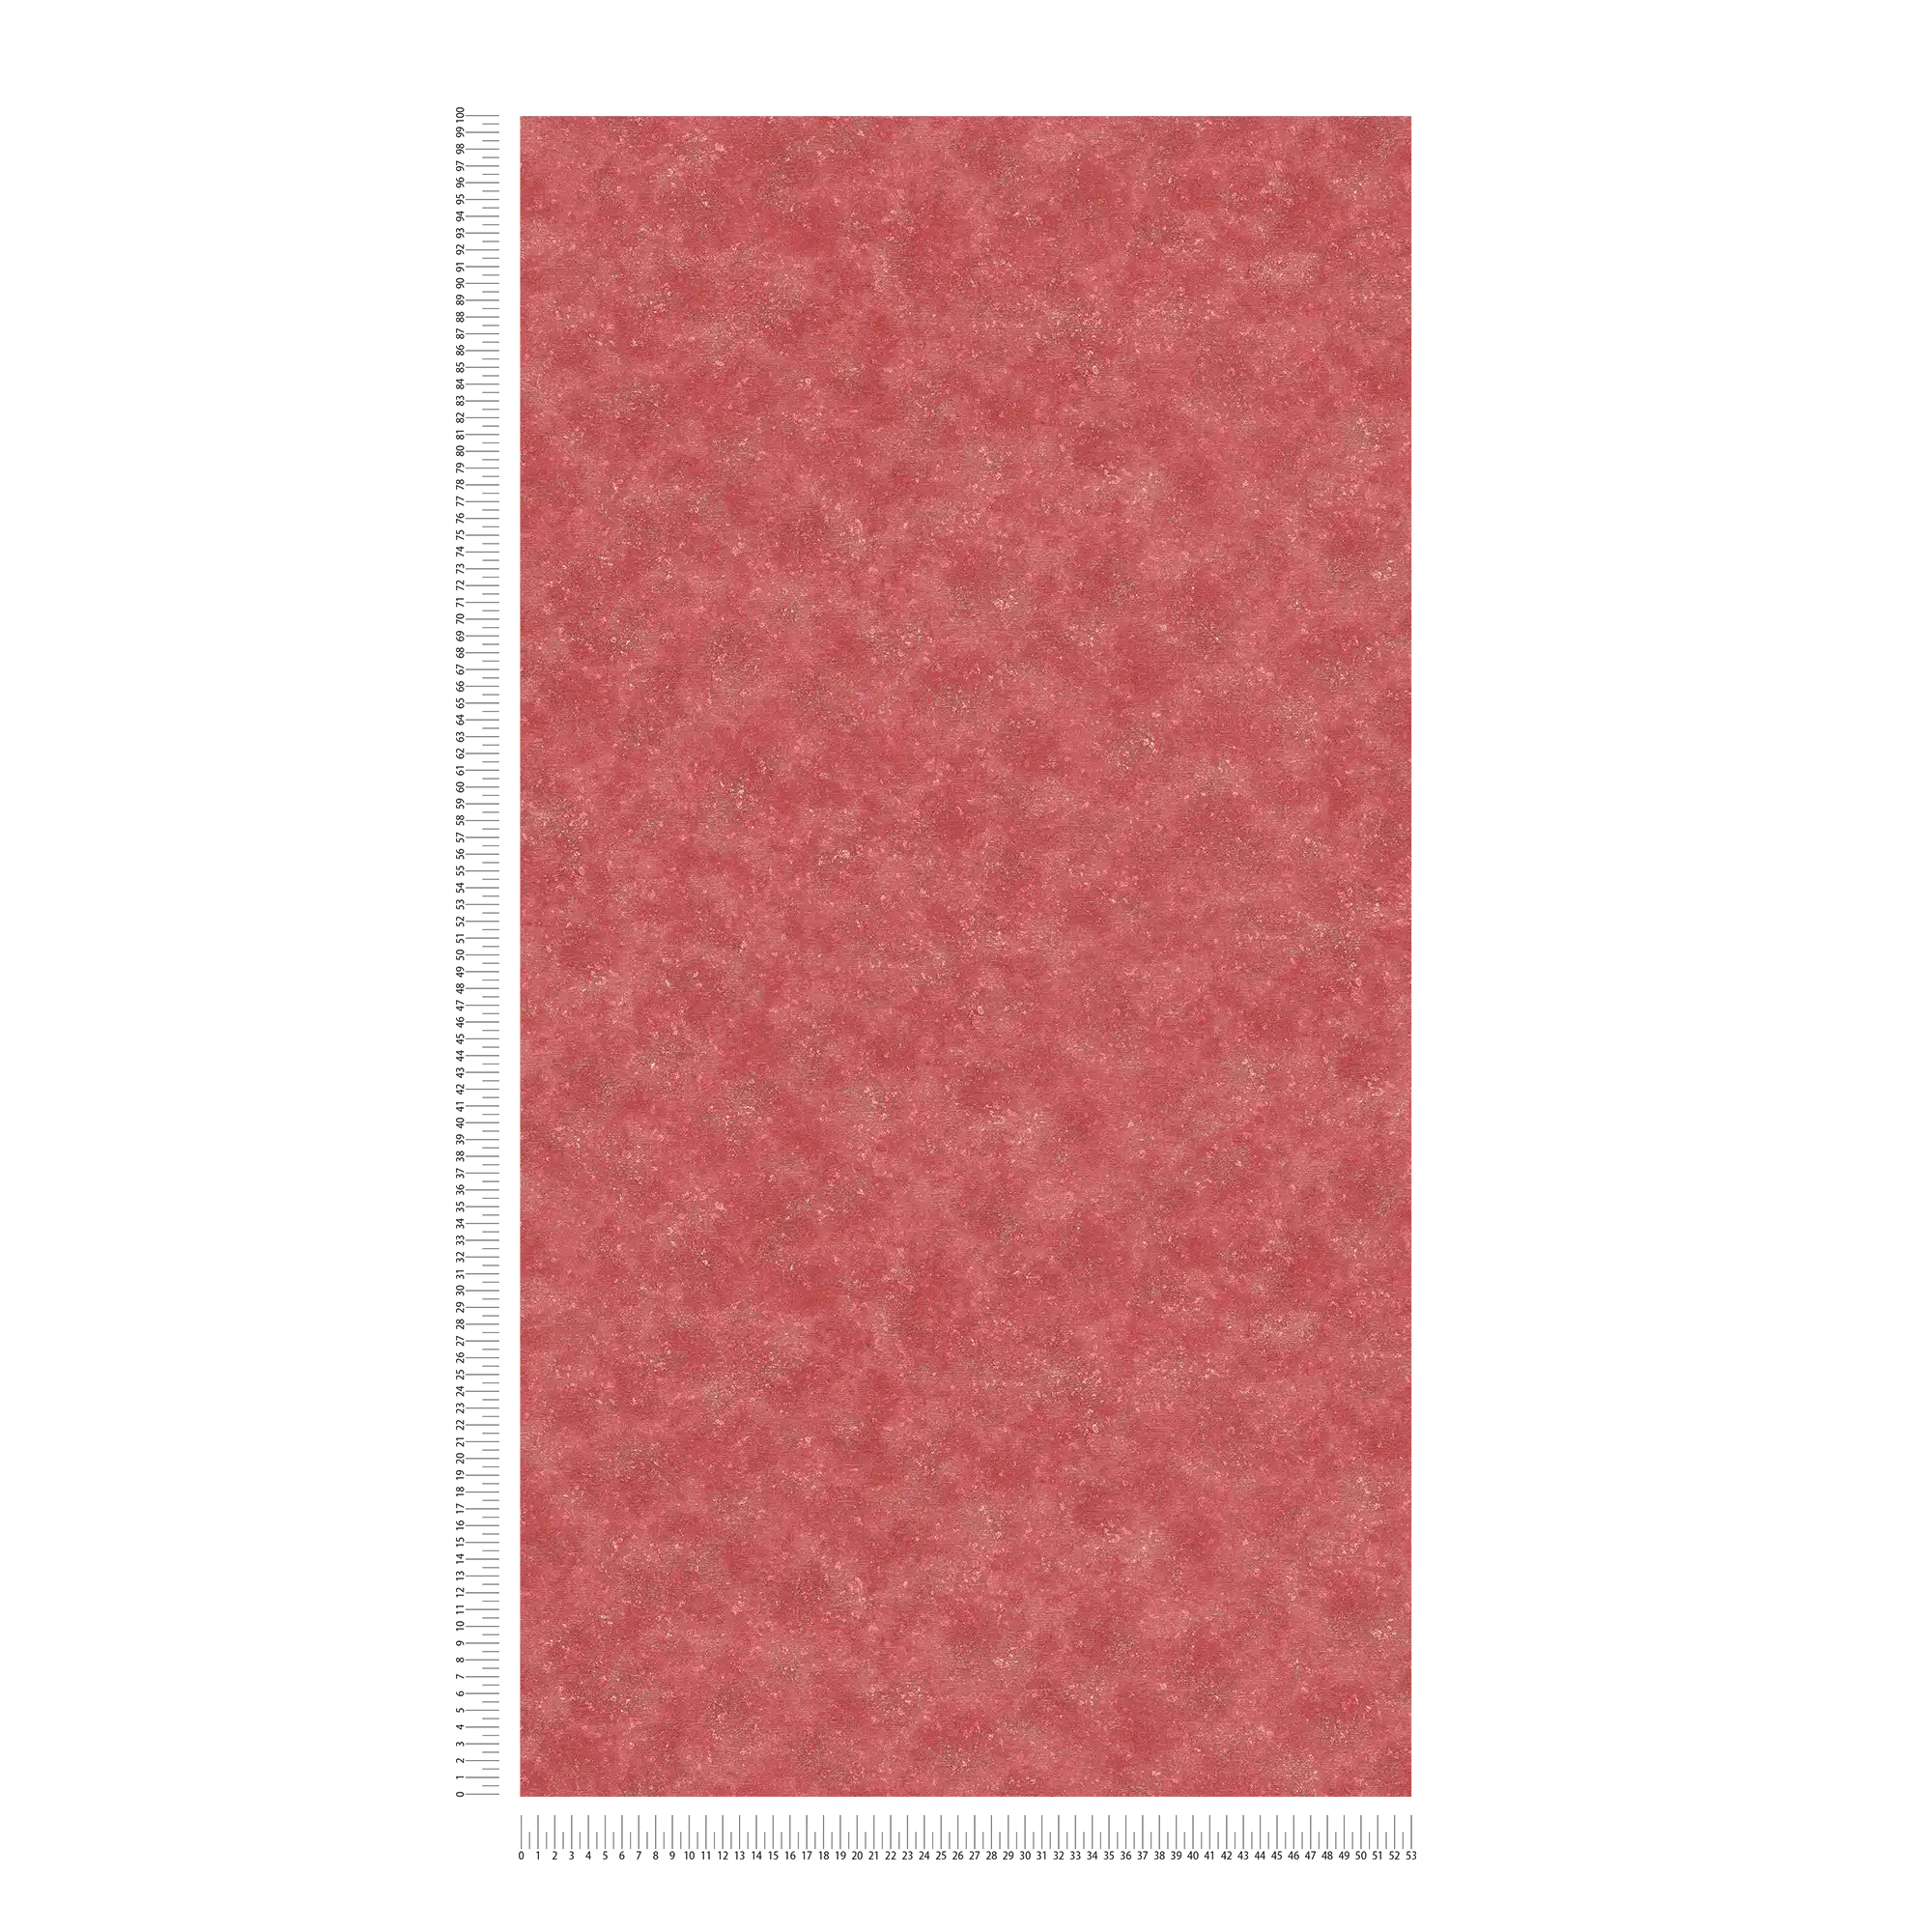             Red non-woven wallpaper shaded, satin with texture effect
        